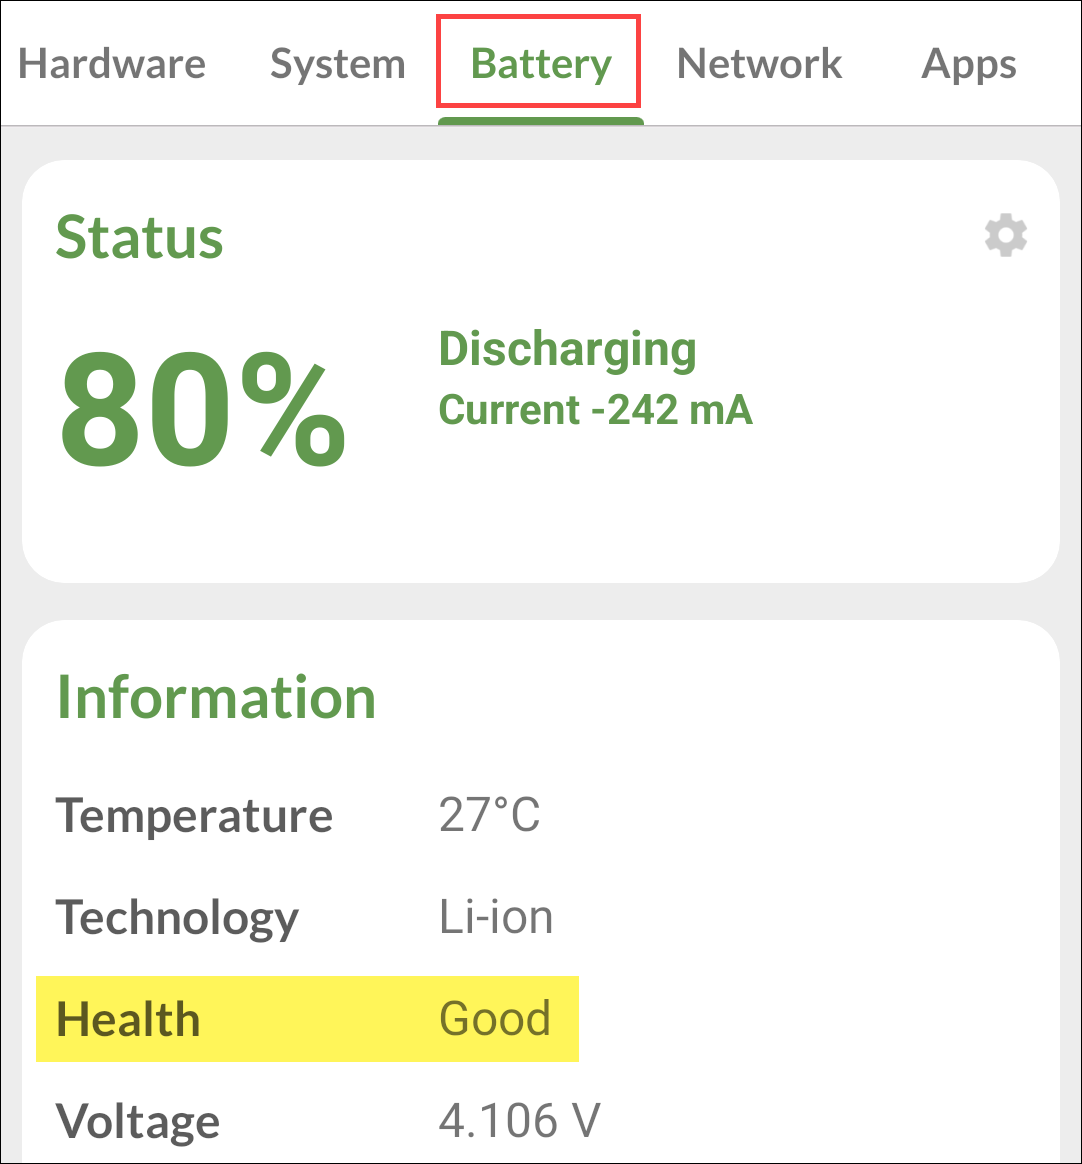 Check "Health" on the Battery tab.